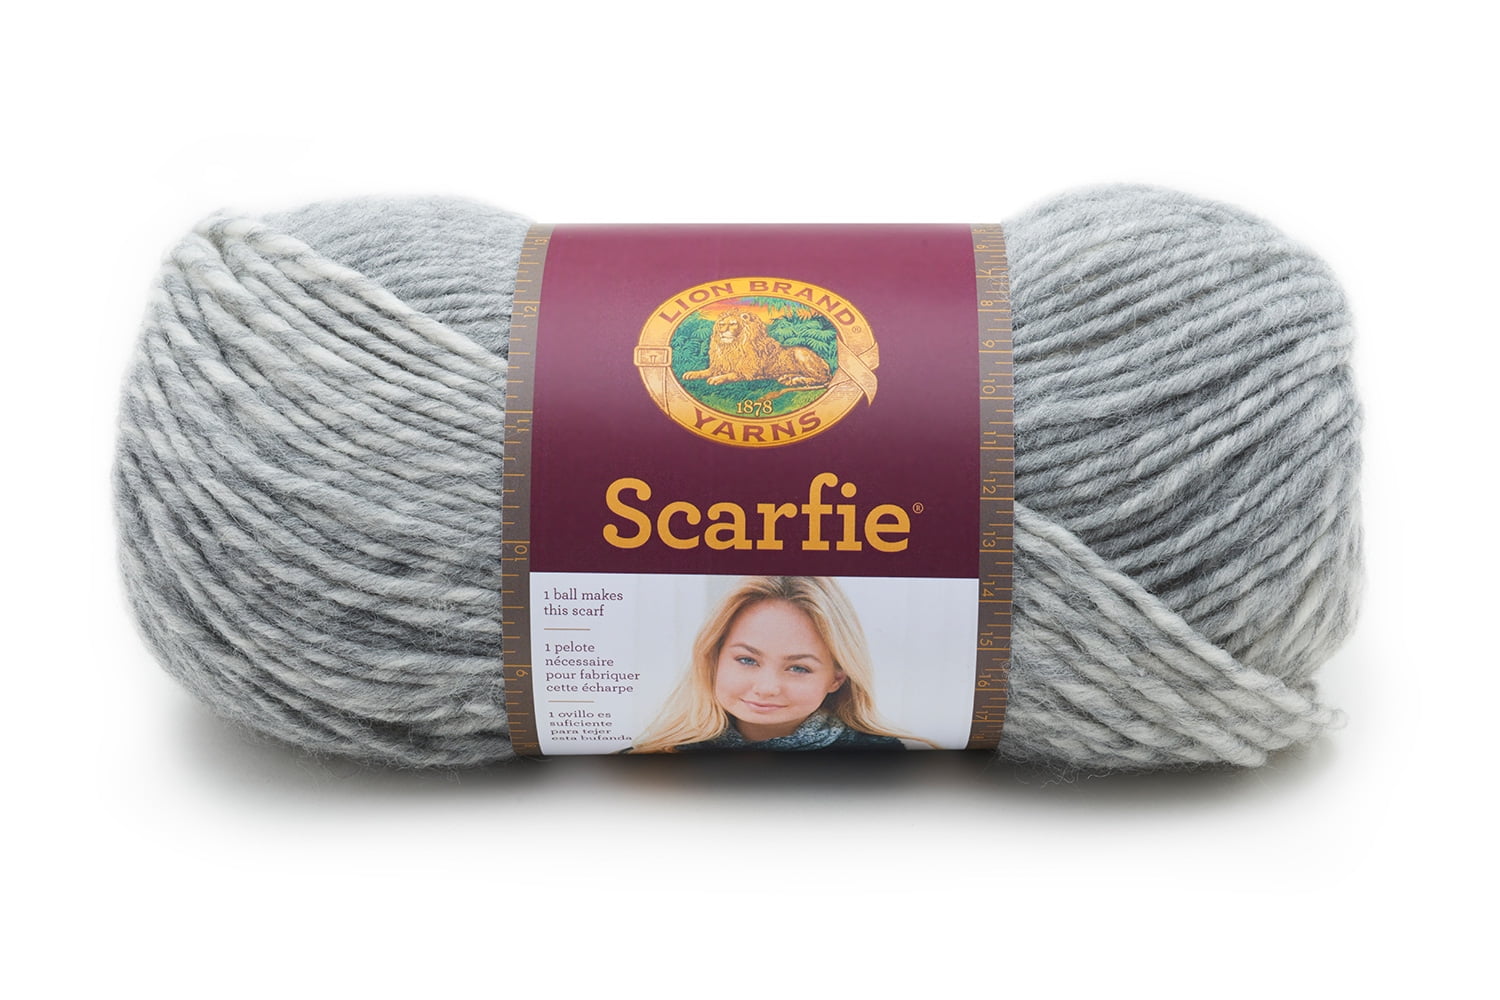 Lion Brand Scarfie Yarn - Charcoal / Magenta, 1 ct - Fry's Food Stores